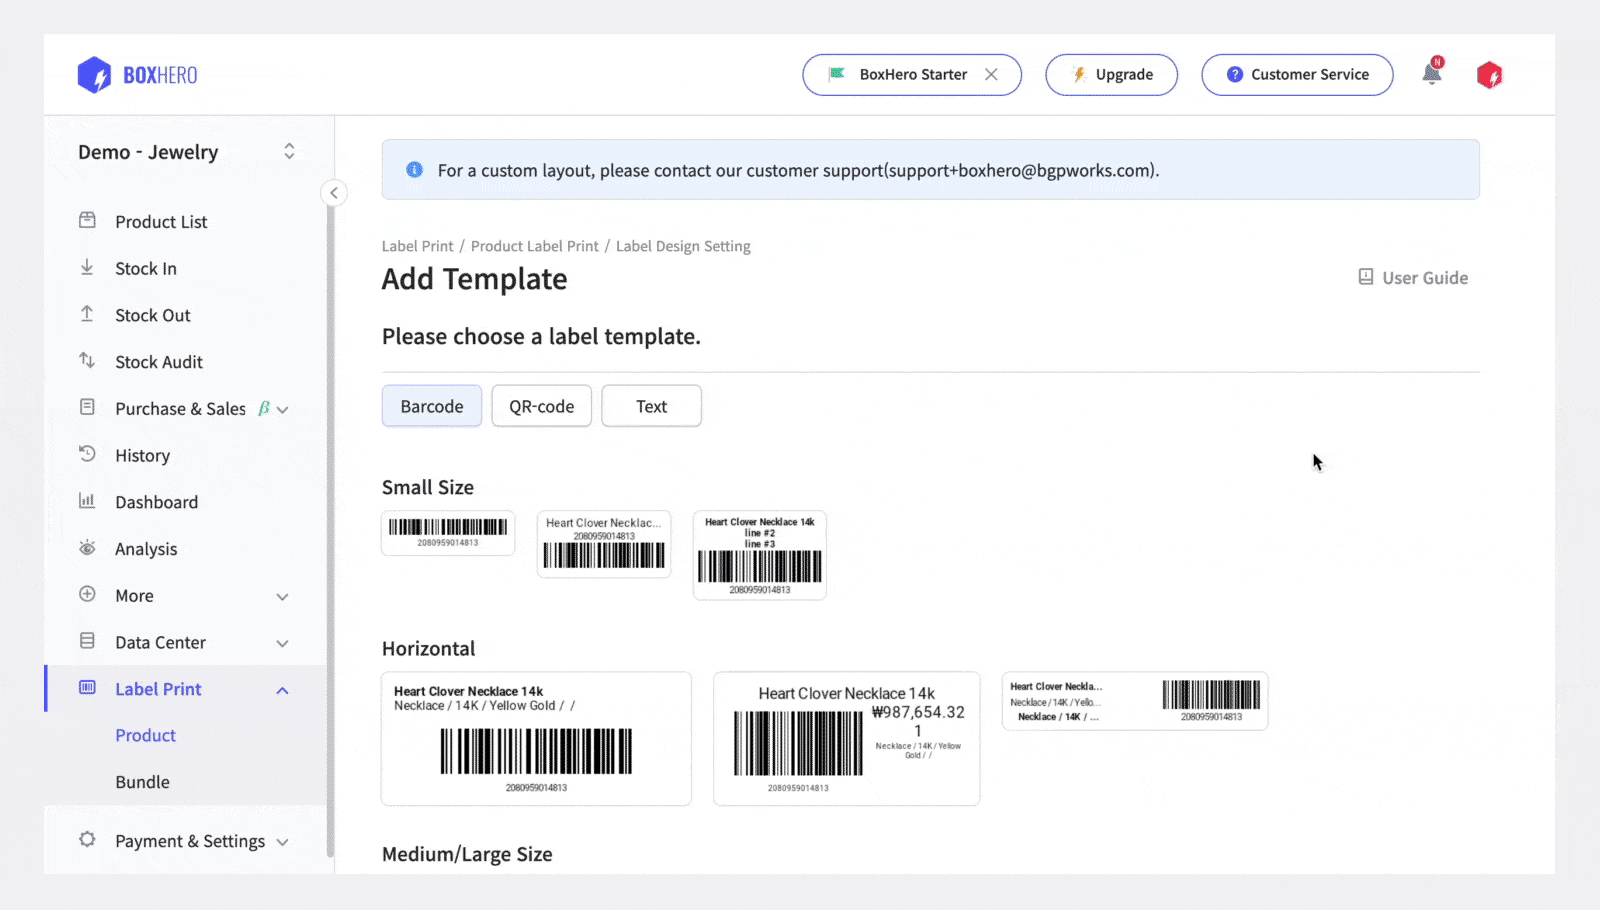 Print and edit barcodes in the BoxHero app